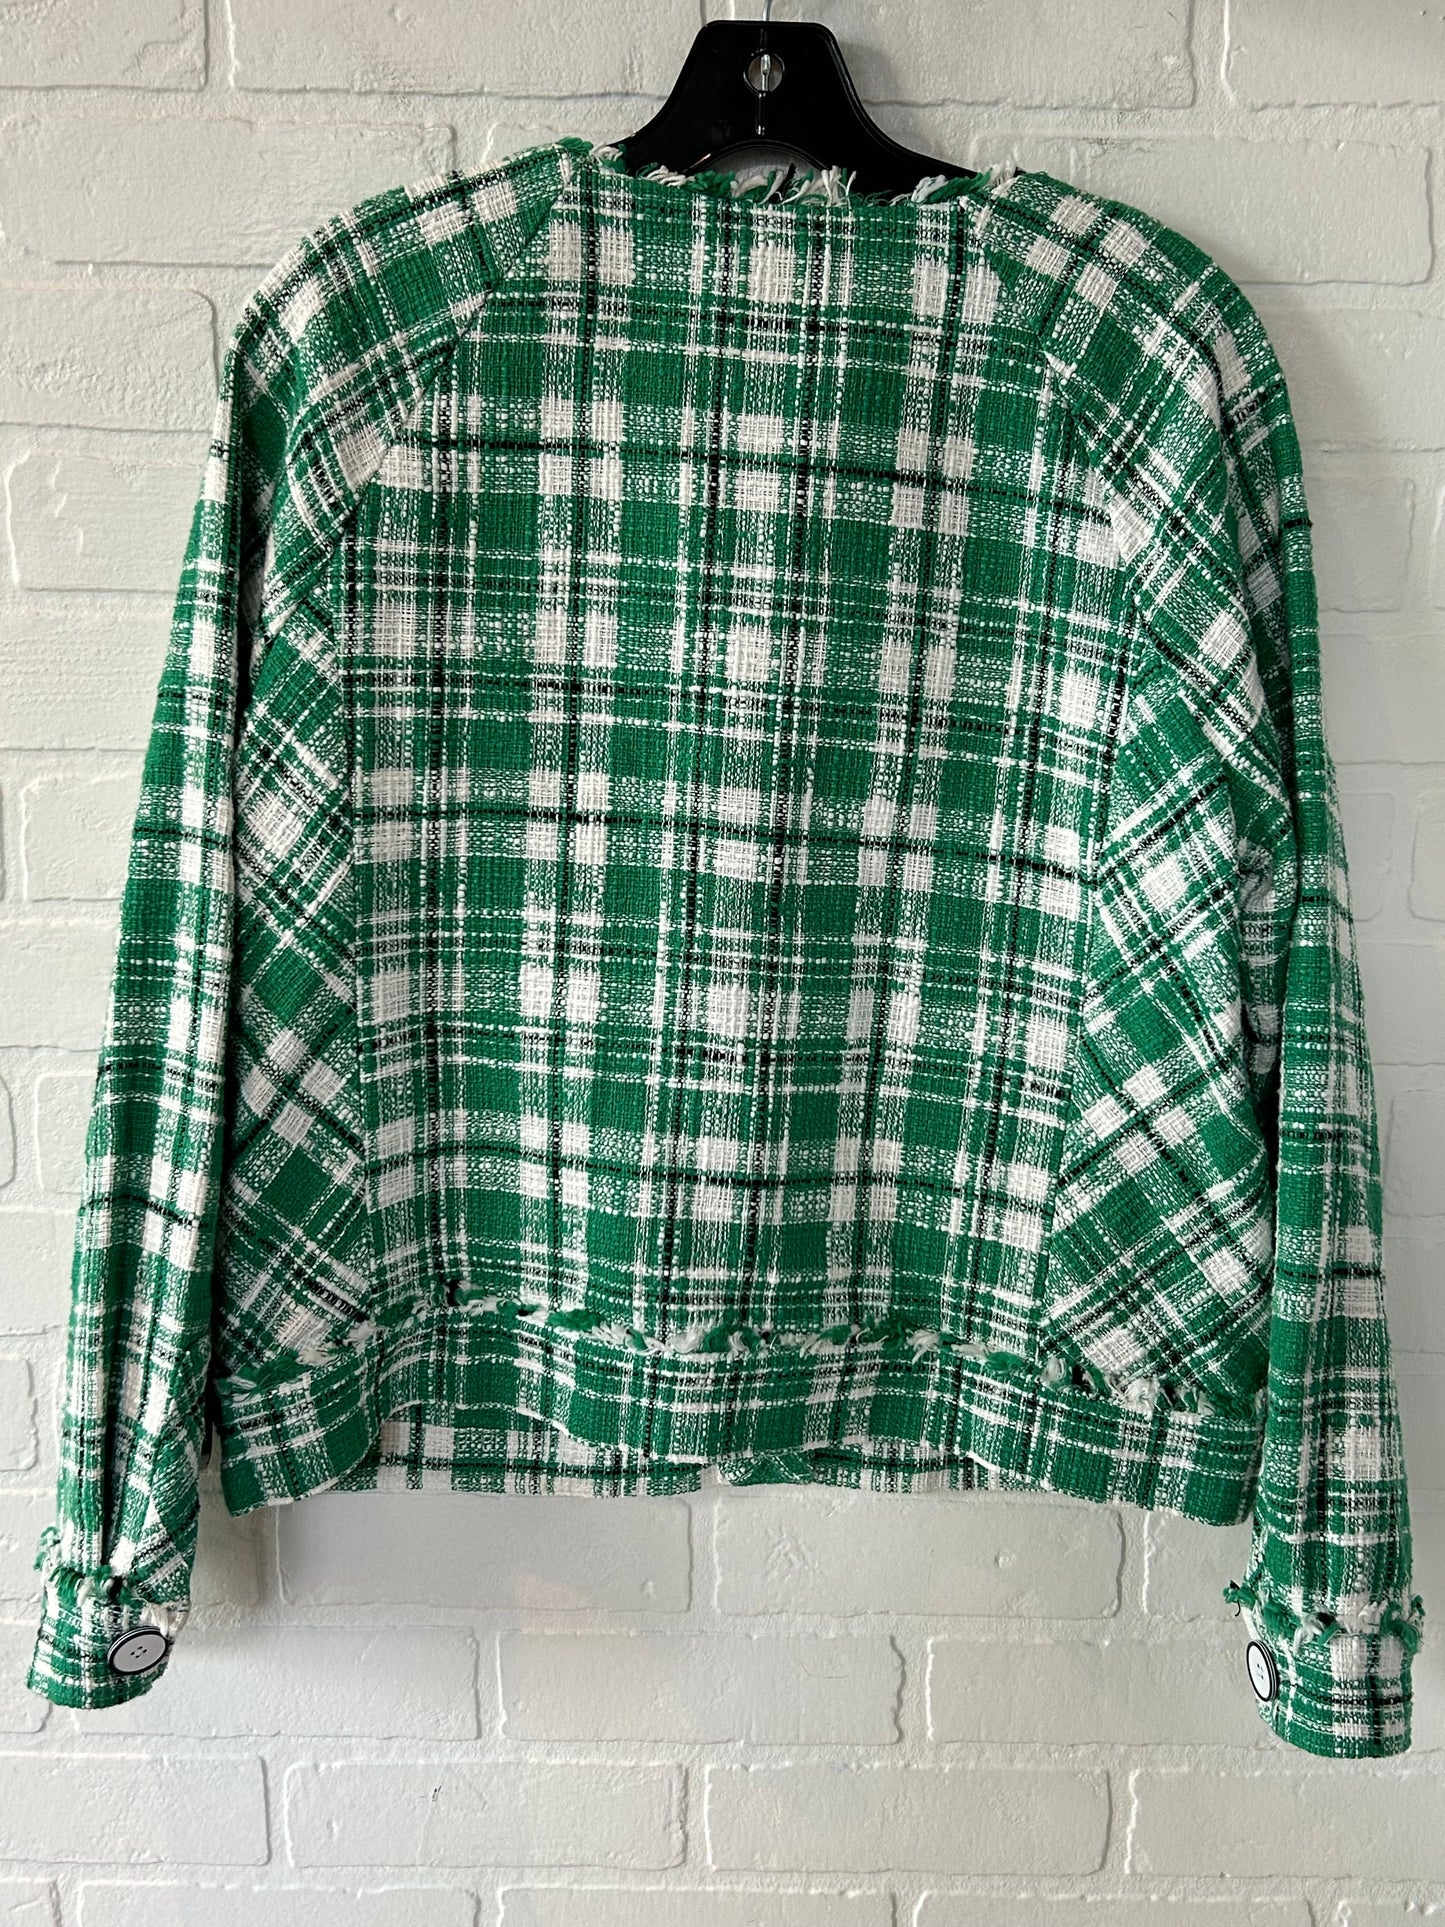 Green & White Jacket Other Cabi, Size M